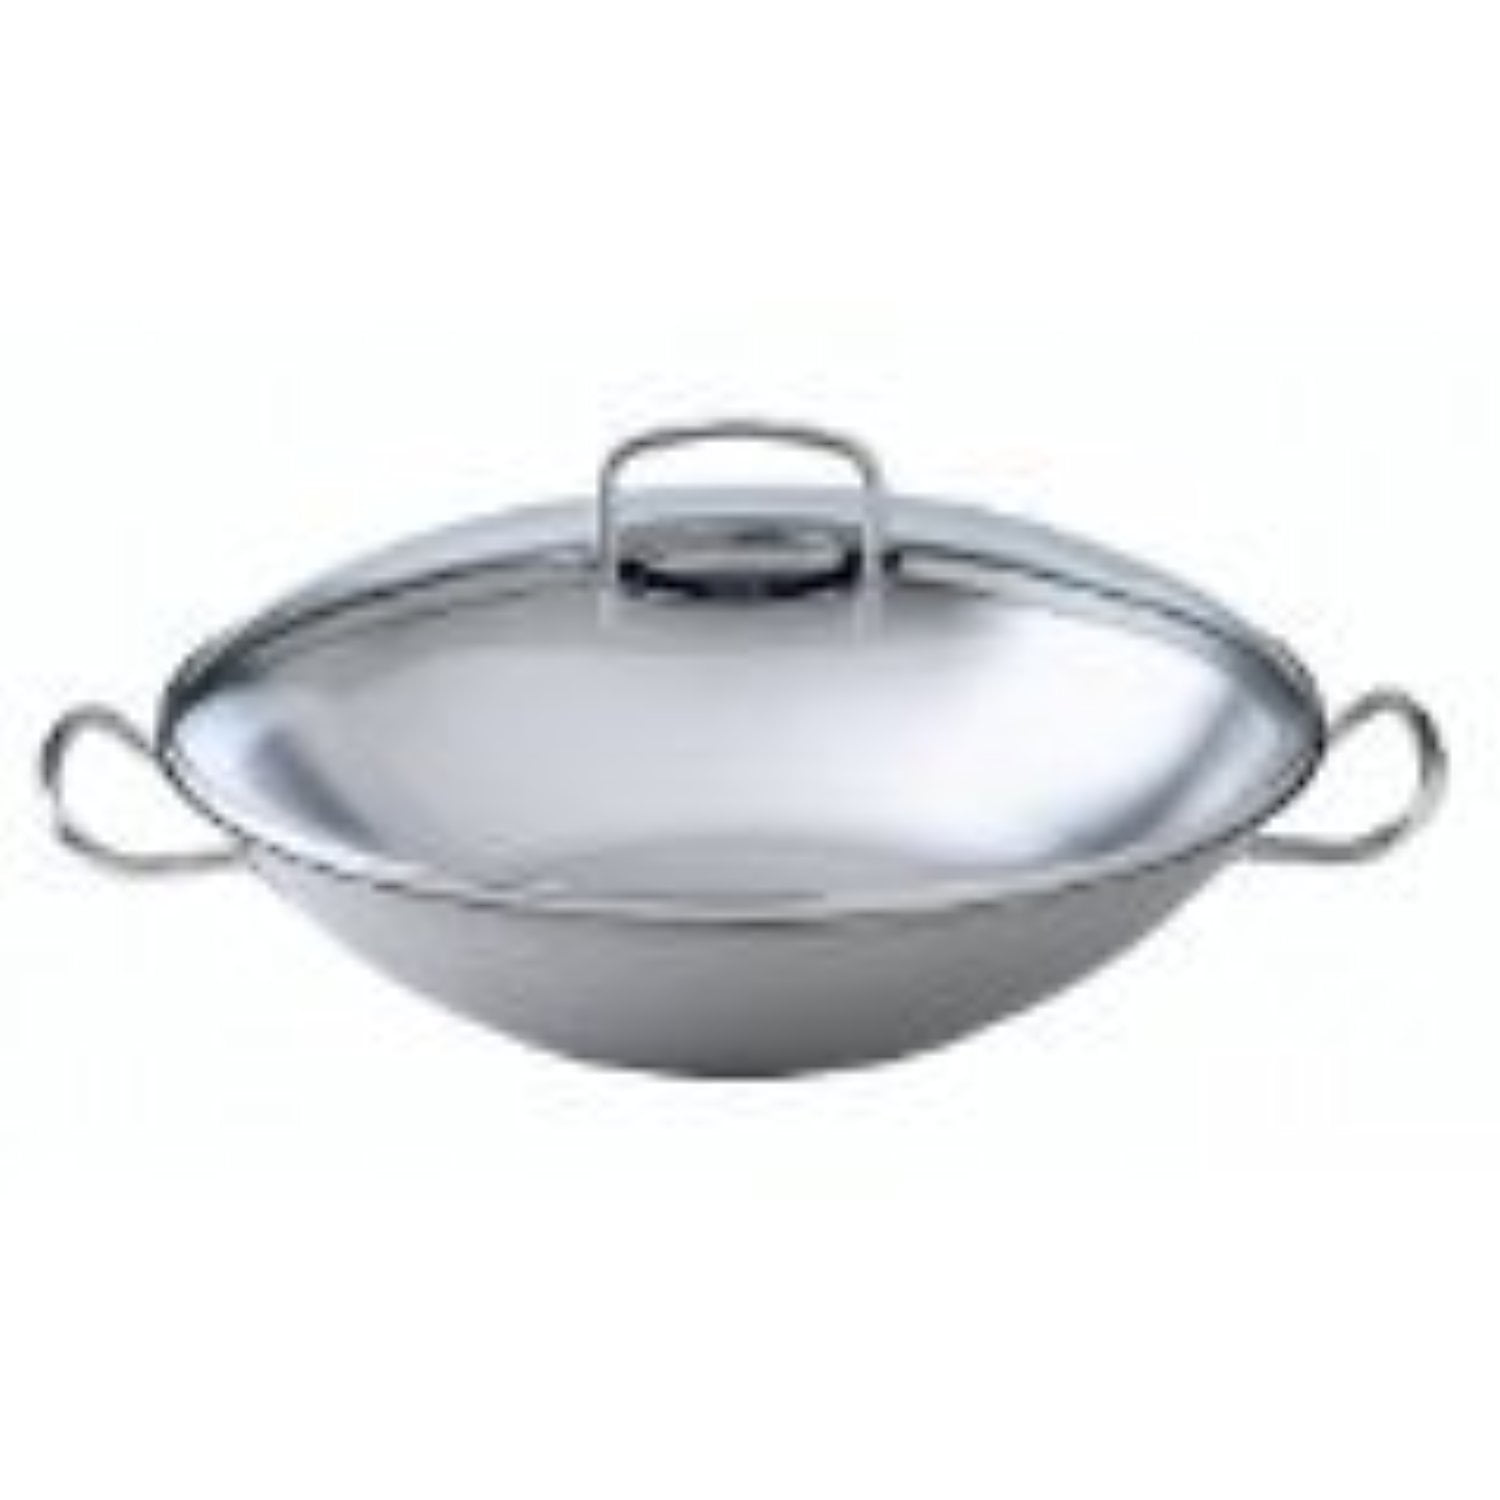 Fissler Original-Profi Collection® 2019 Stainless Steel Wok with Glass Lid